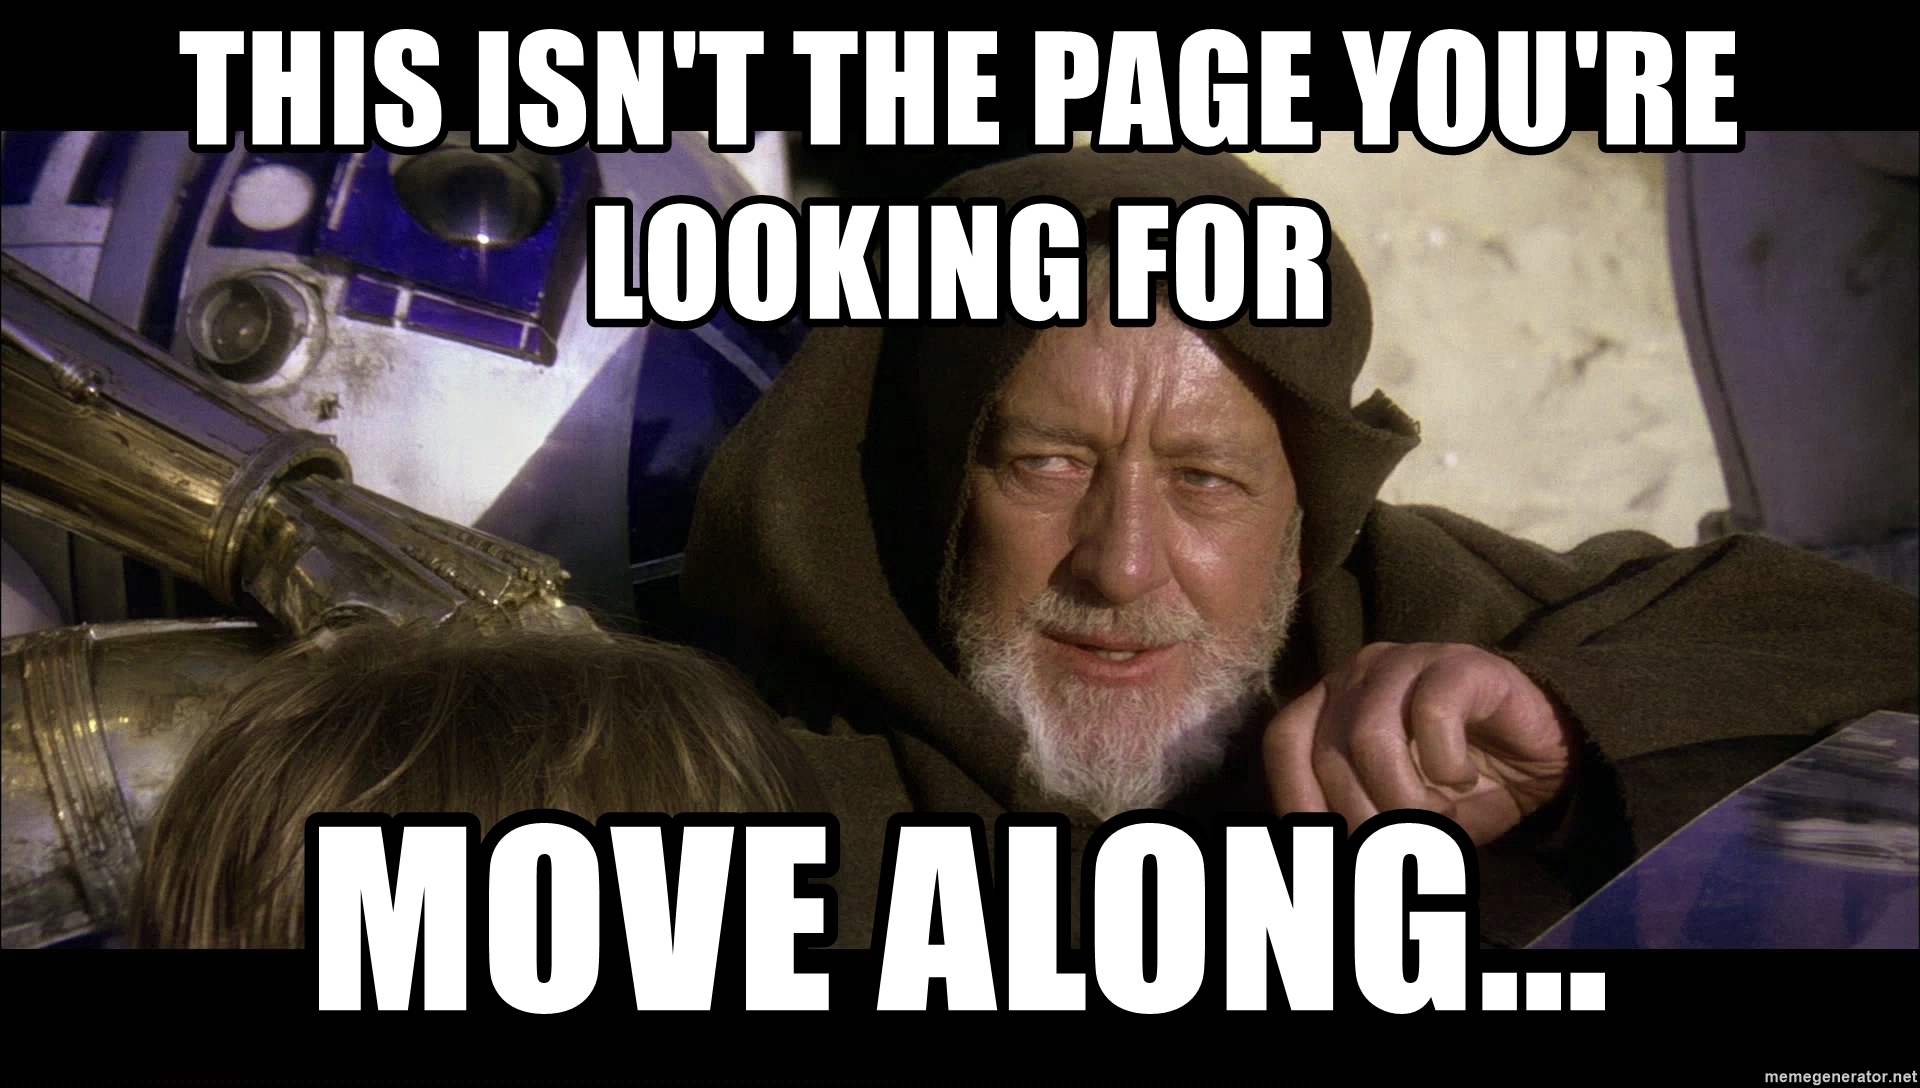 This is NOT the Page You're Looking For. Pound Sand